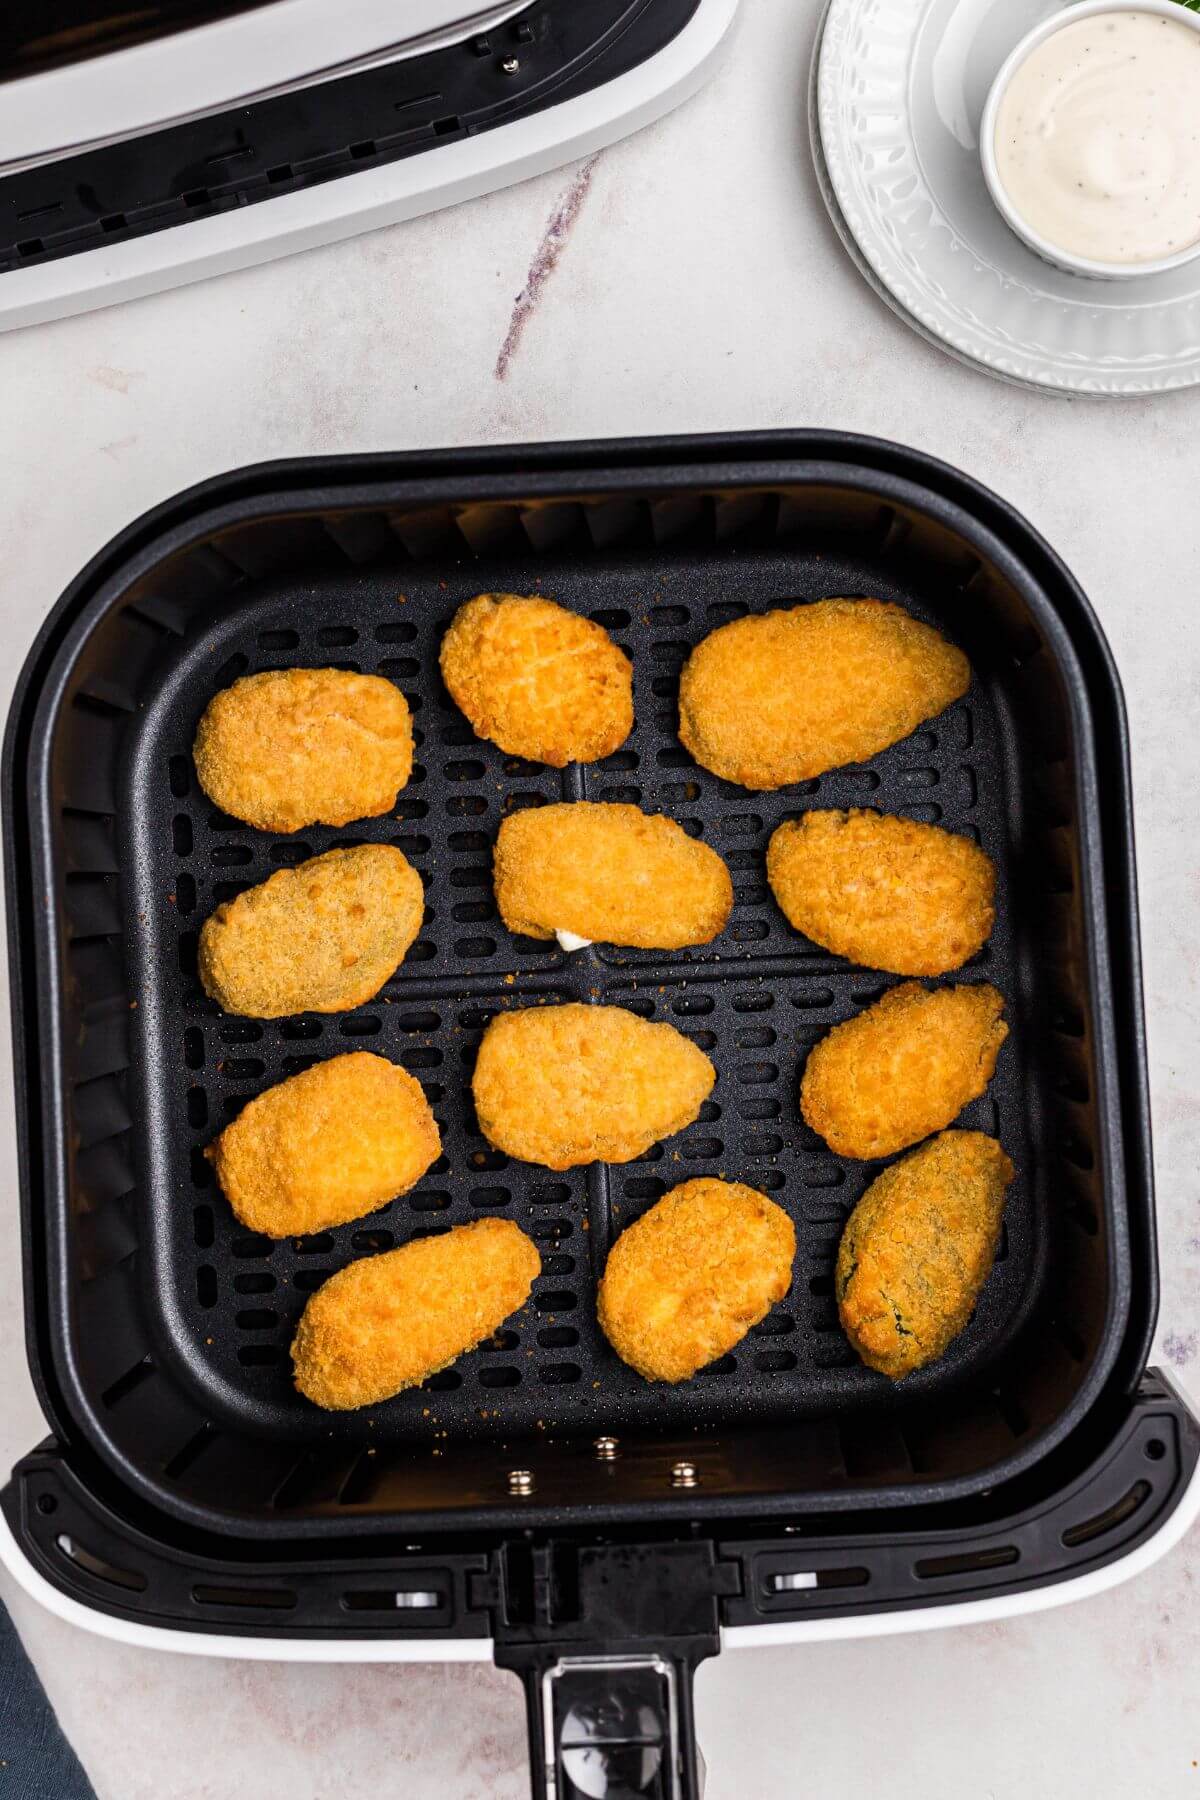 Golden crispy breaded jalapeno poppers in the air fryer basket after being cooked. 